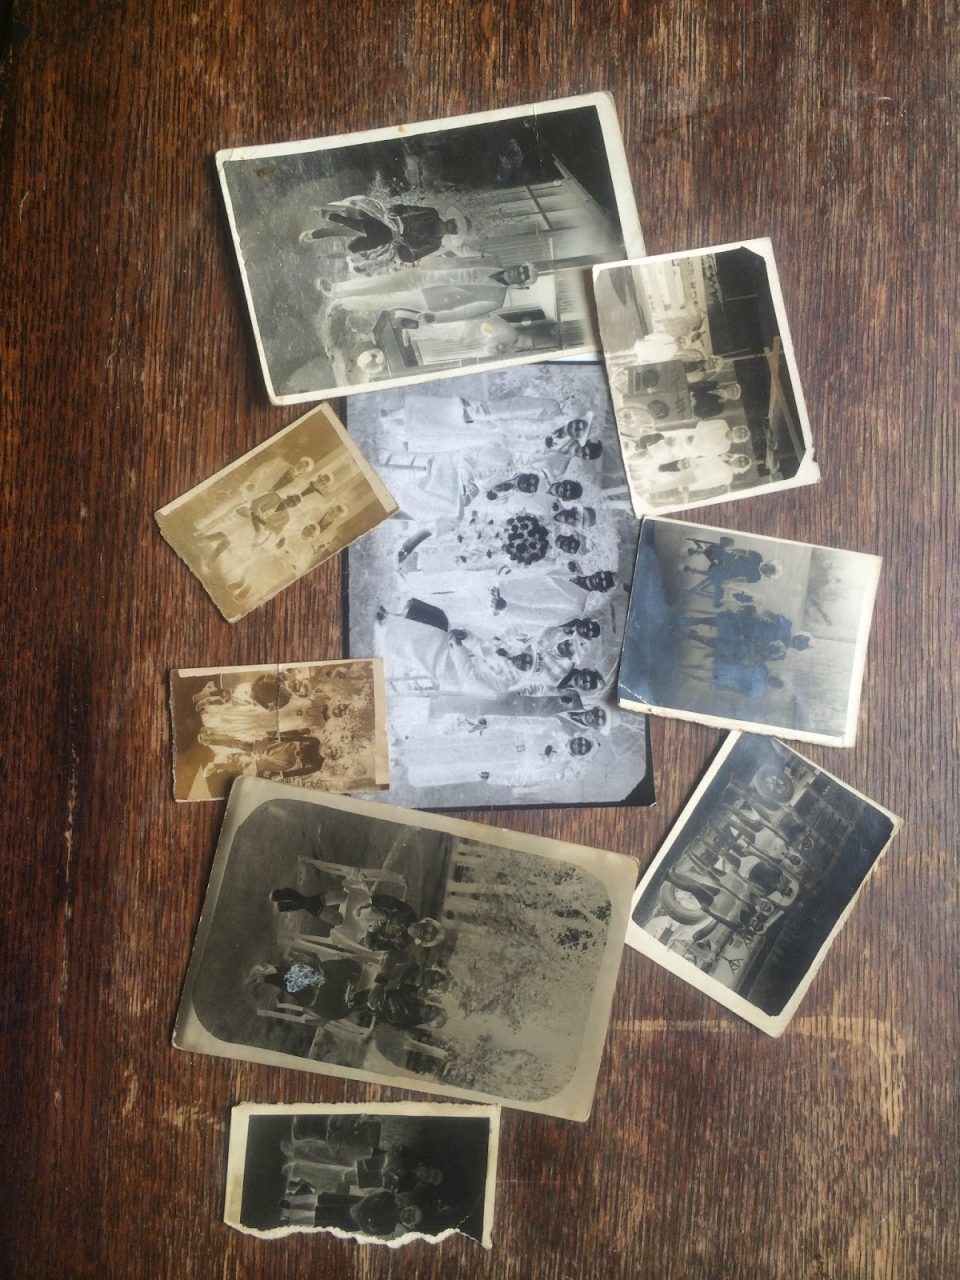 collection of the old negatives, belongs to Brittonie Fletcher